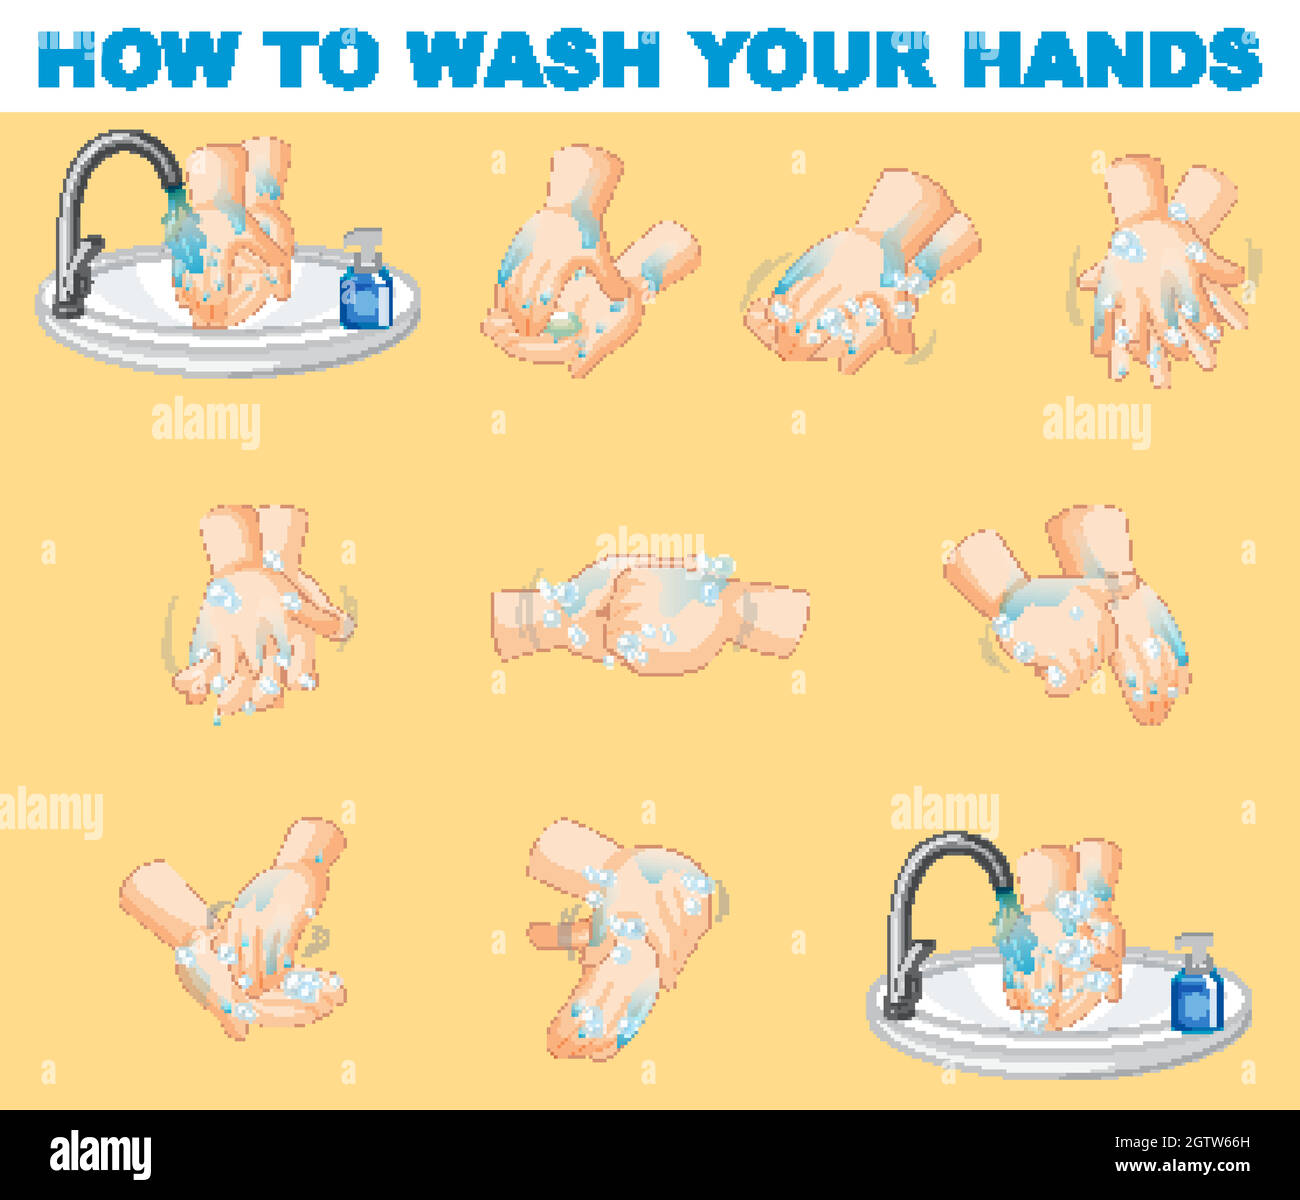 Poster design for how to wash your hands Stock Vector